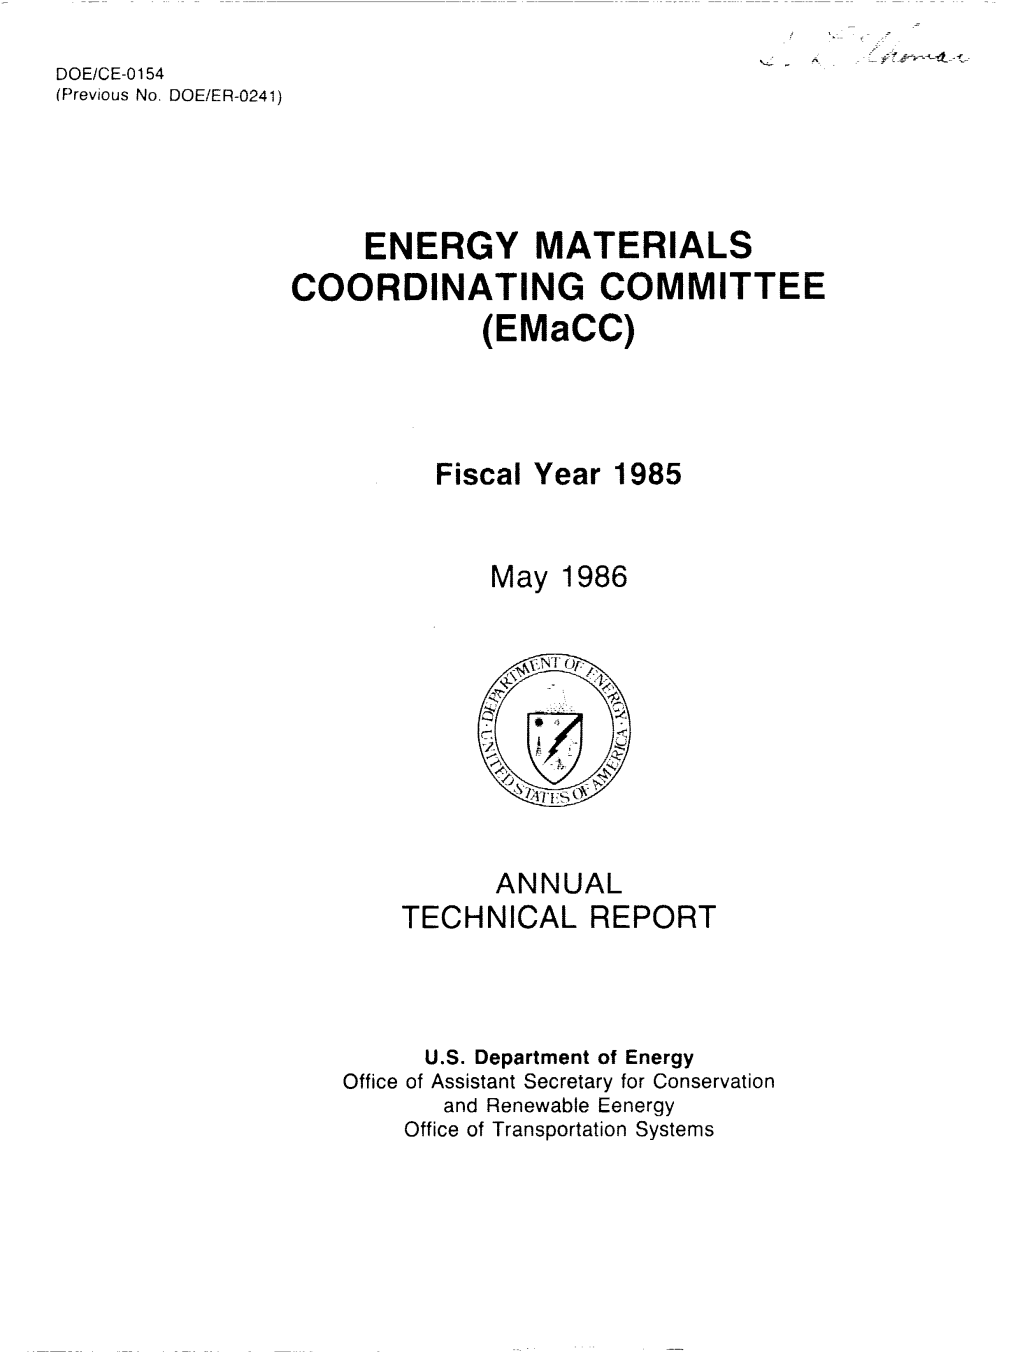 FY 1985 Budget Summary for Emacc DOE Materials Activities Compiled by DHR, Inc., the Contractor Who Put the Emacc Report Together